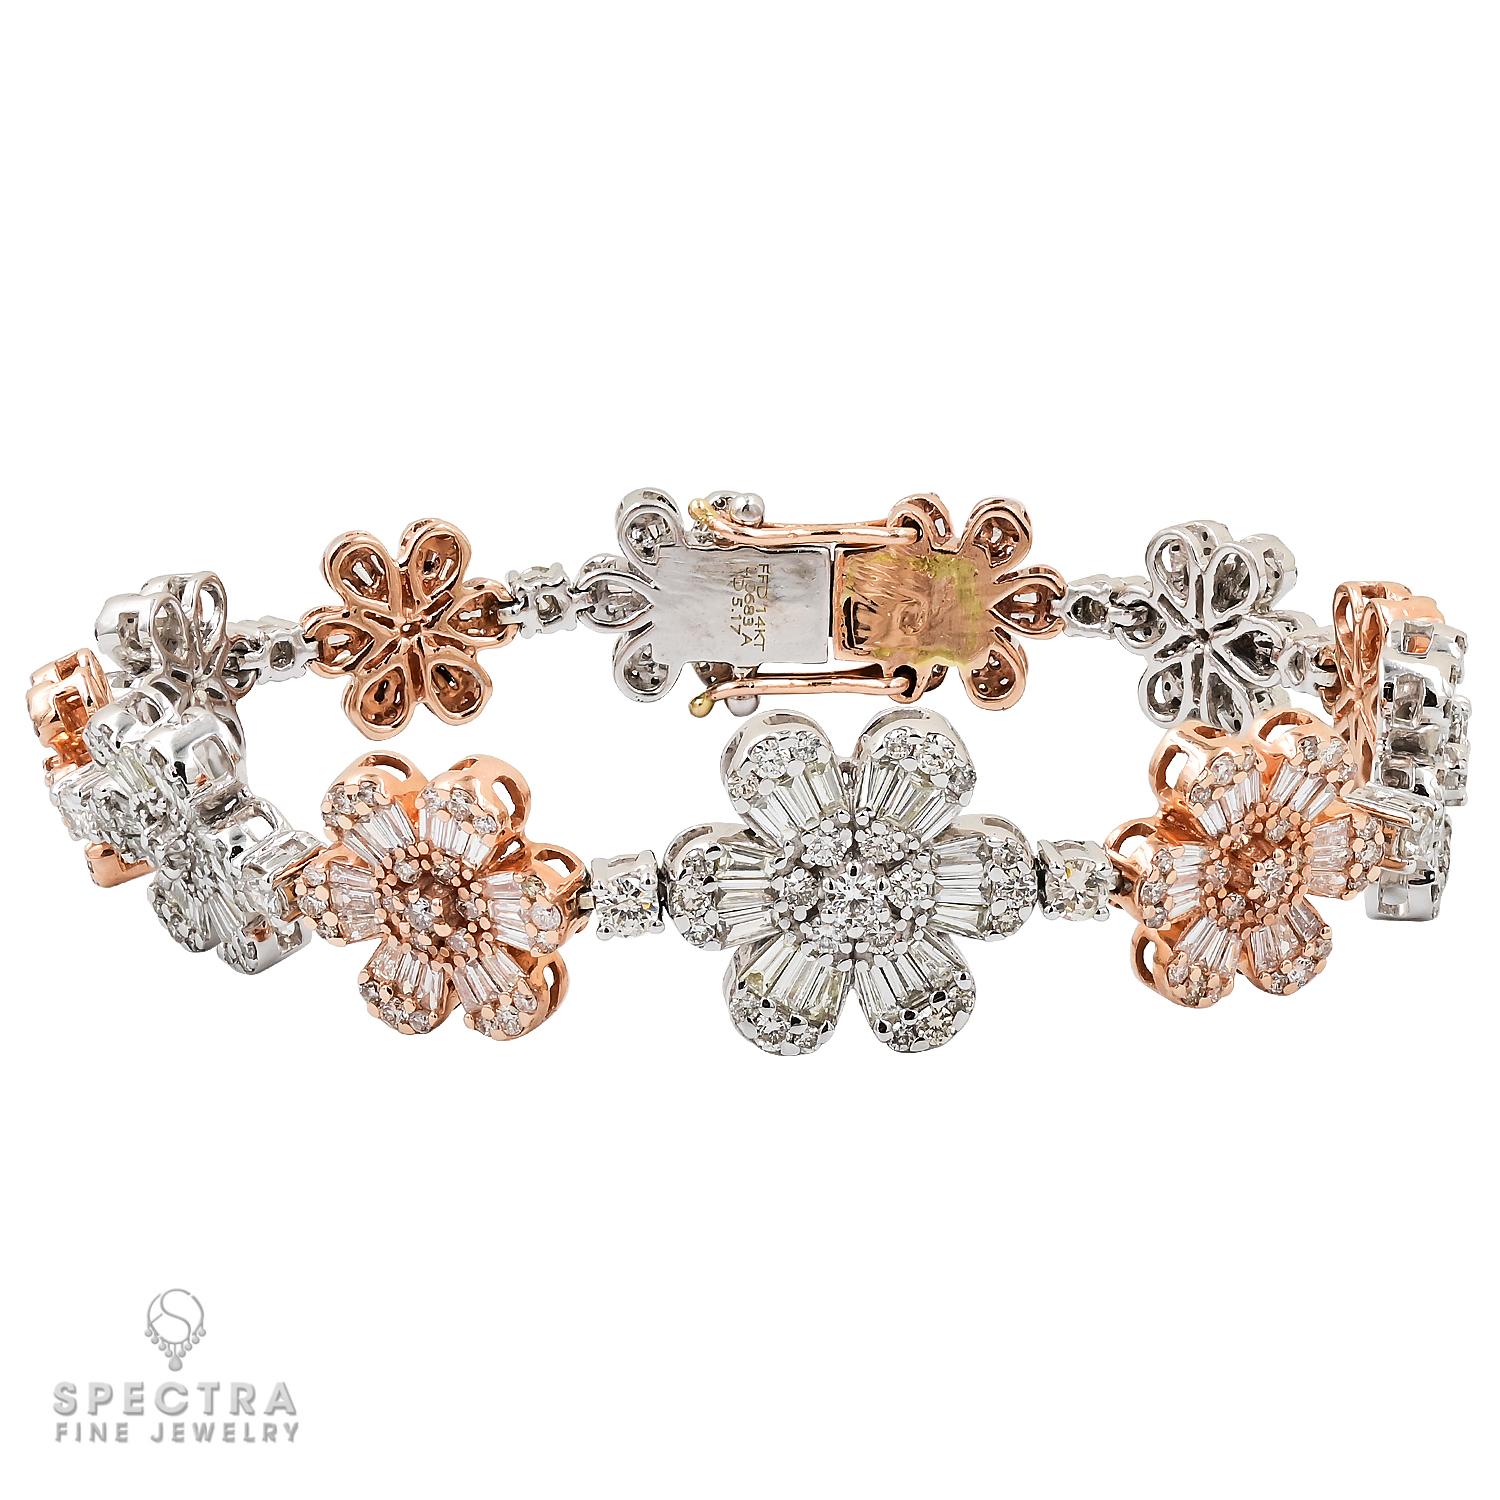 A beautiful bracelet embellished with diamonds and made in 14K white and rose gold.
Designed as 12 flowers that are set with round and baguette diamonds.
Total weight of diamonds is 5.17 carats.
The diamonds are equivalent to G-I colors, VS-SI